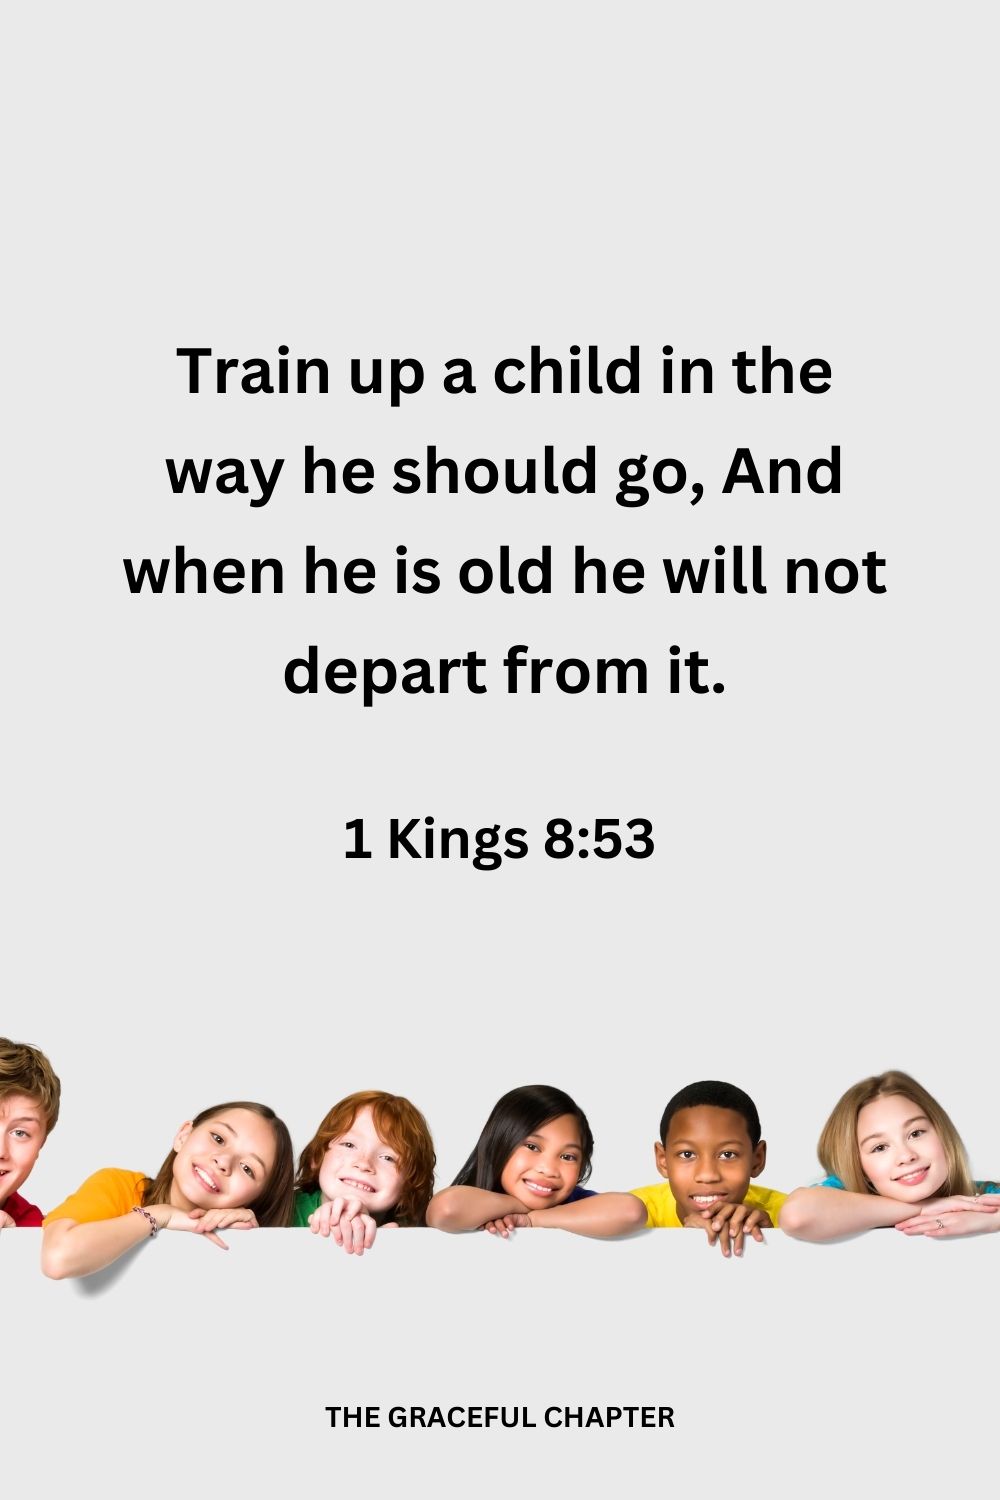 Train up a child in the way he should go, And when he is old he will not depart from it. Proverbs 22:6